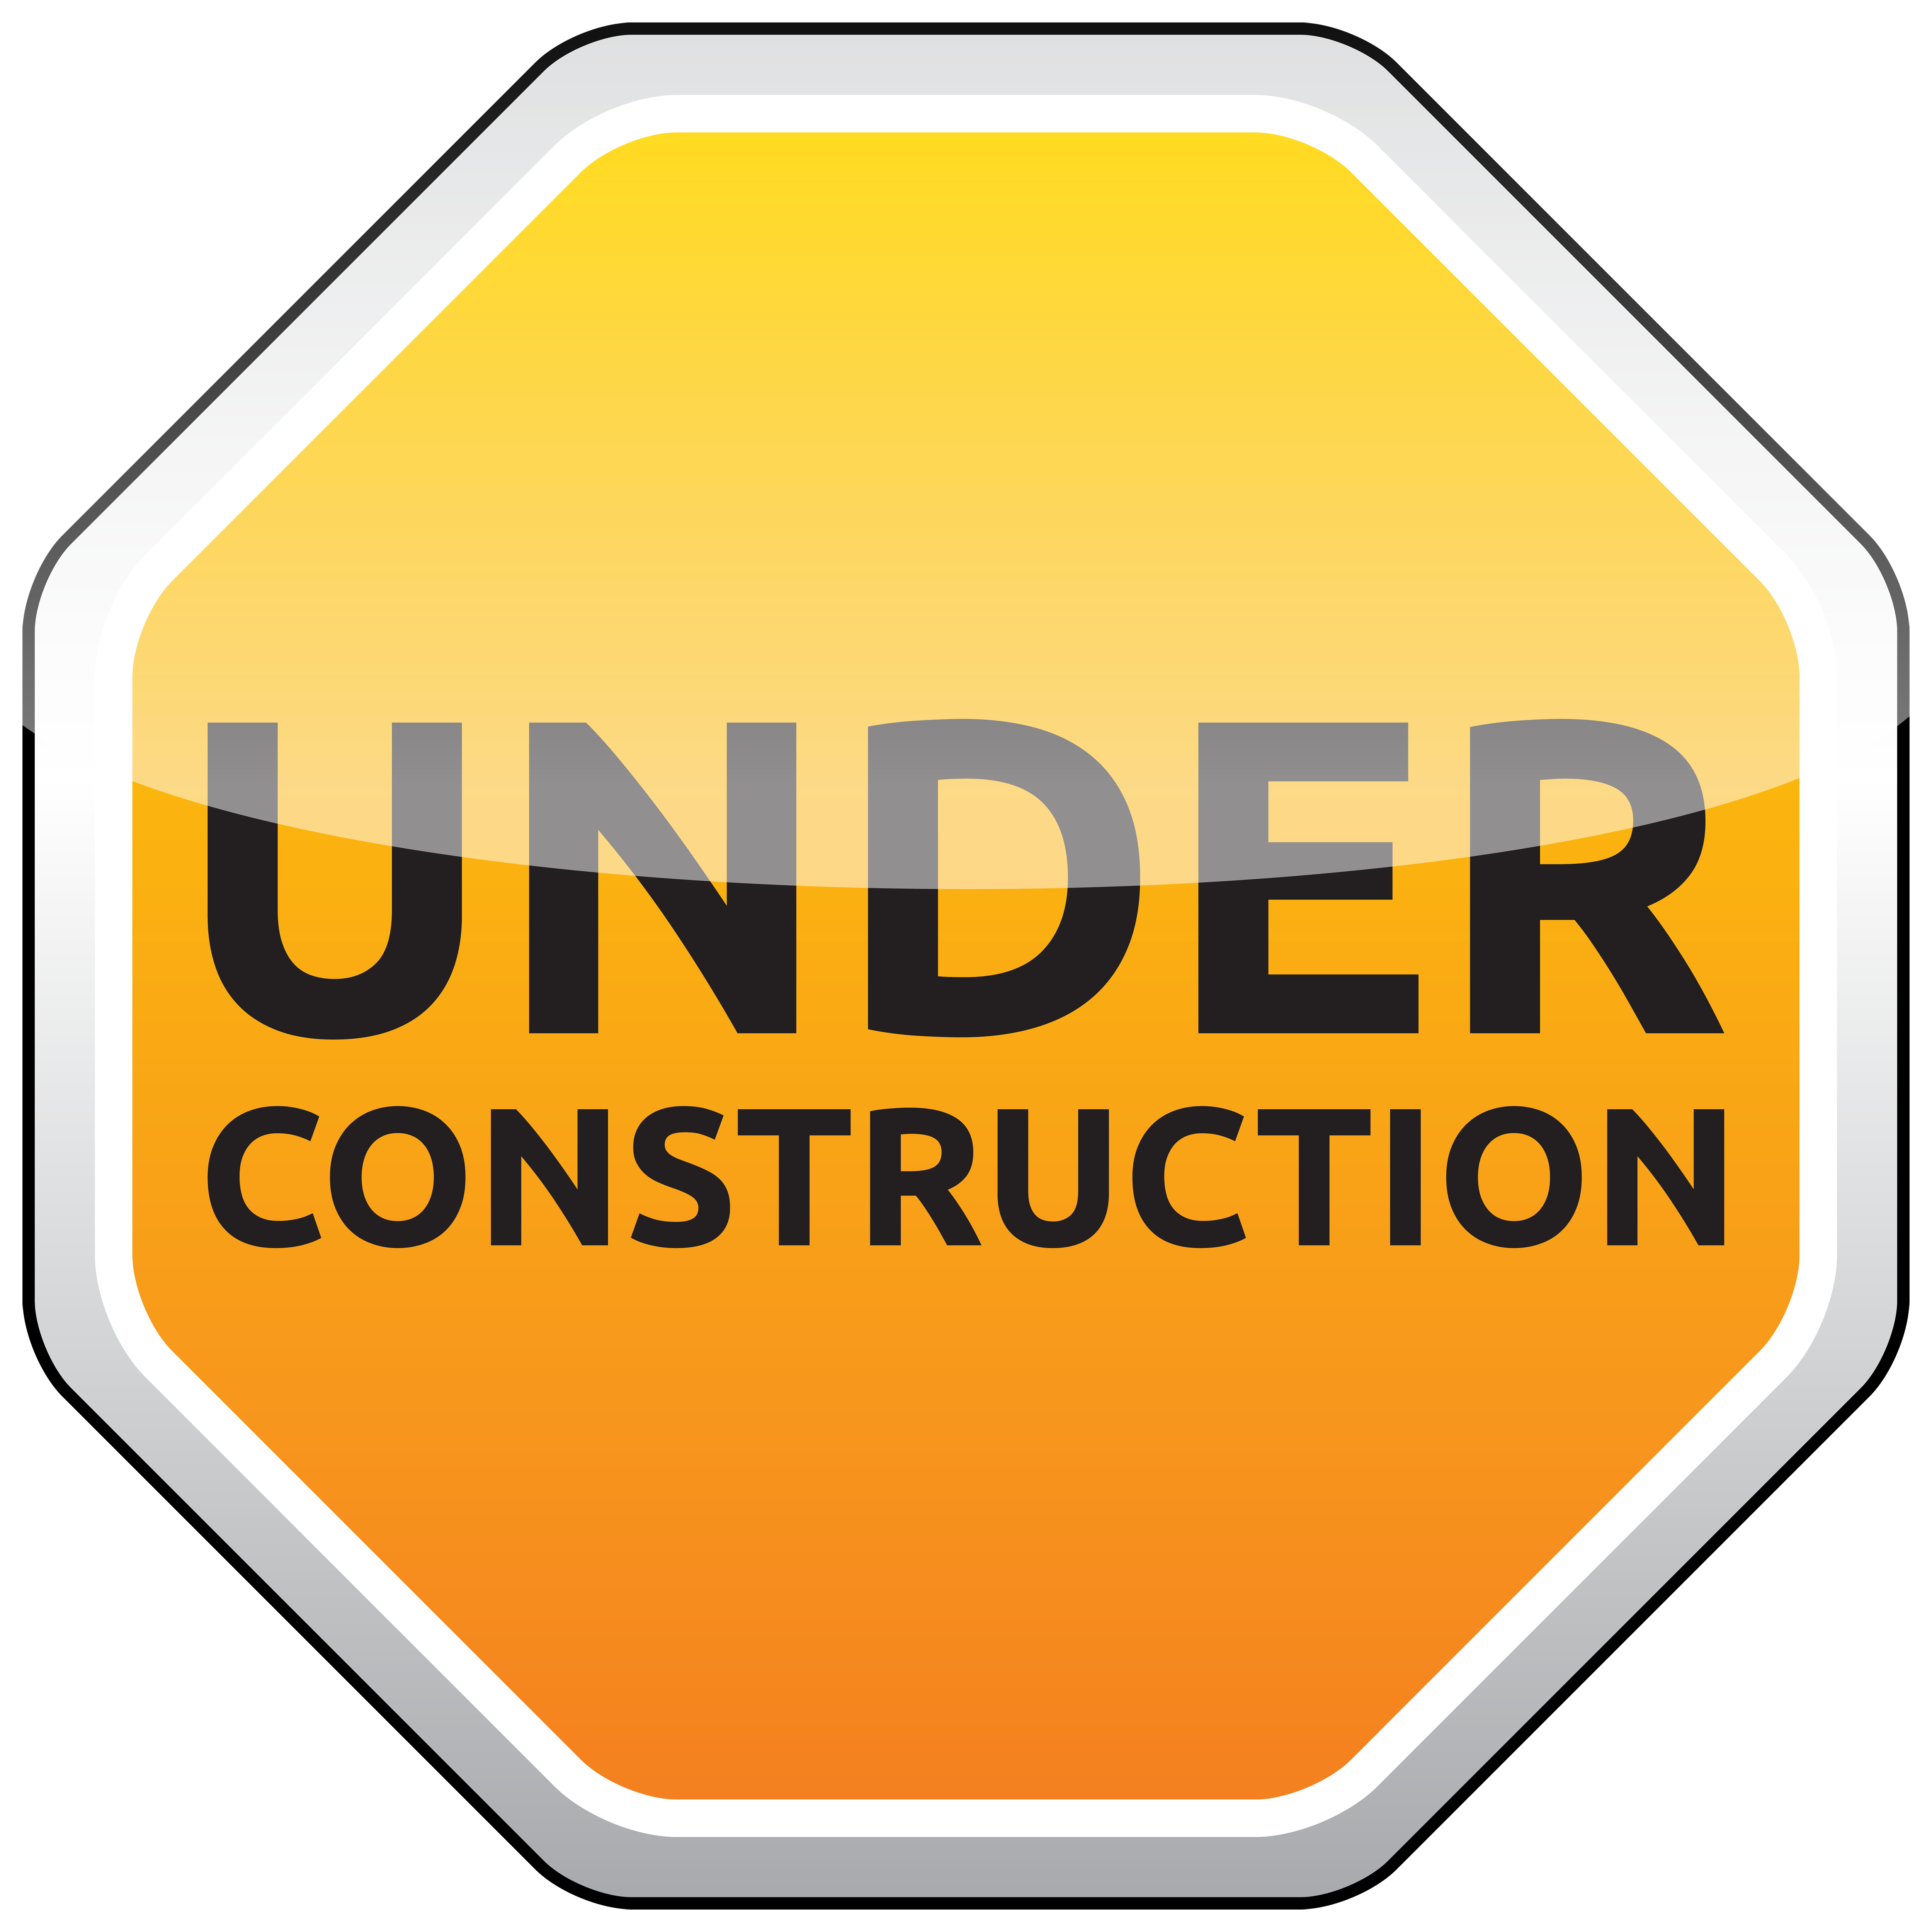 under construction clipart free download - photo #45